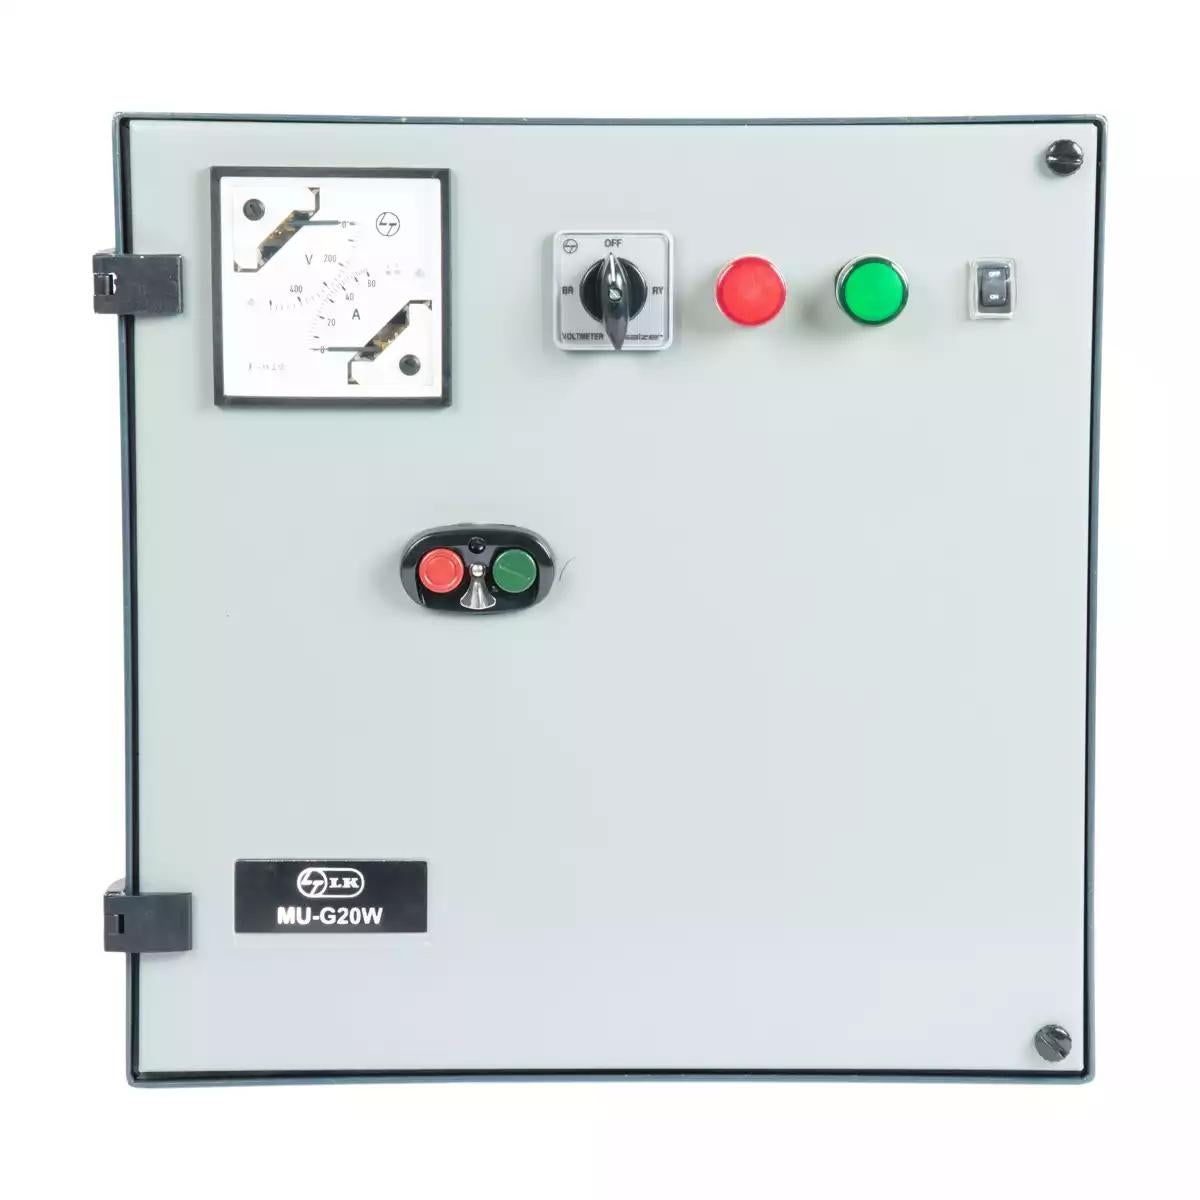 Three Phase Fully Automatic Star Delta Controller with WLC for Submersible Pump Application,MU-G20W,20HP,FASD (CS91038COCO)